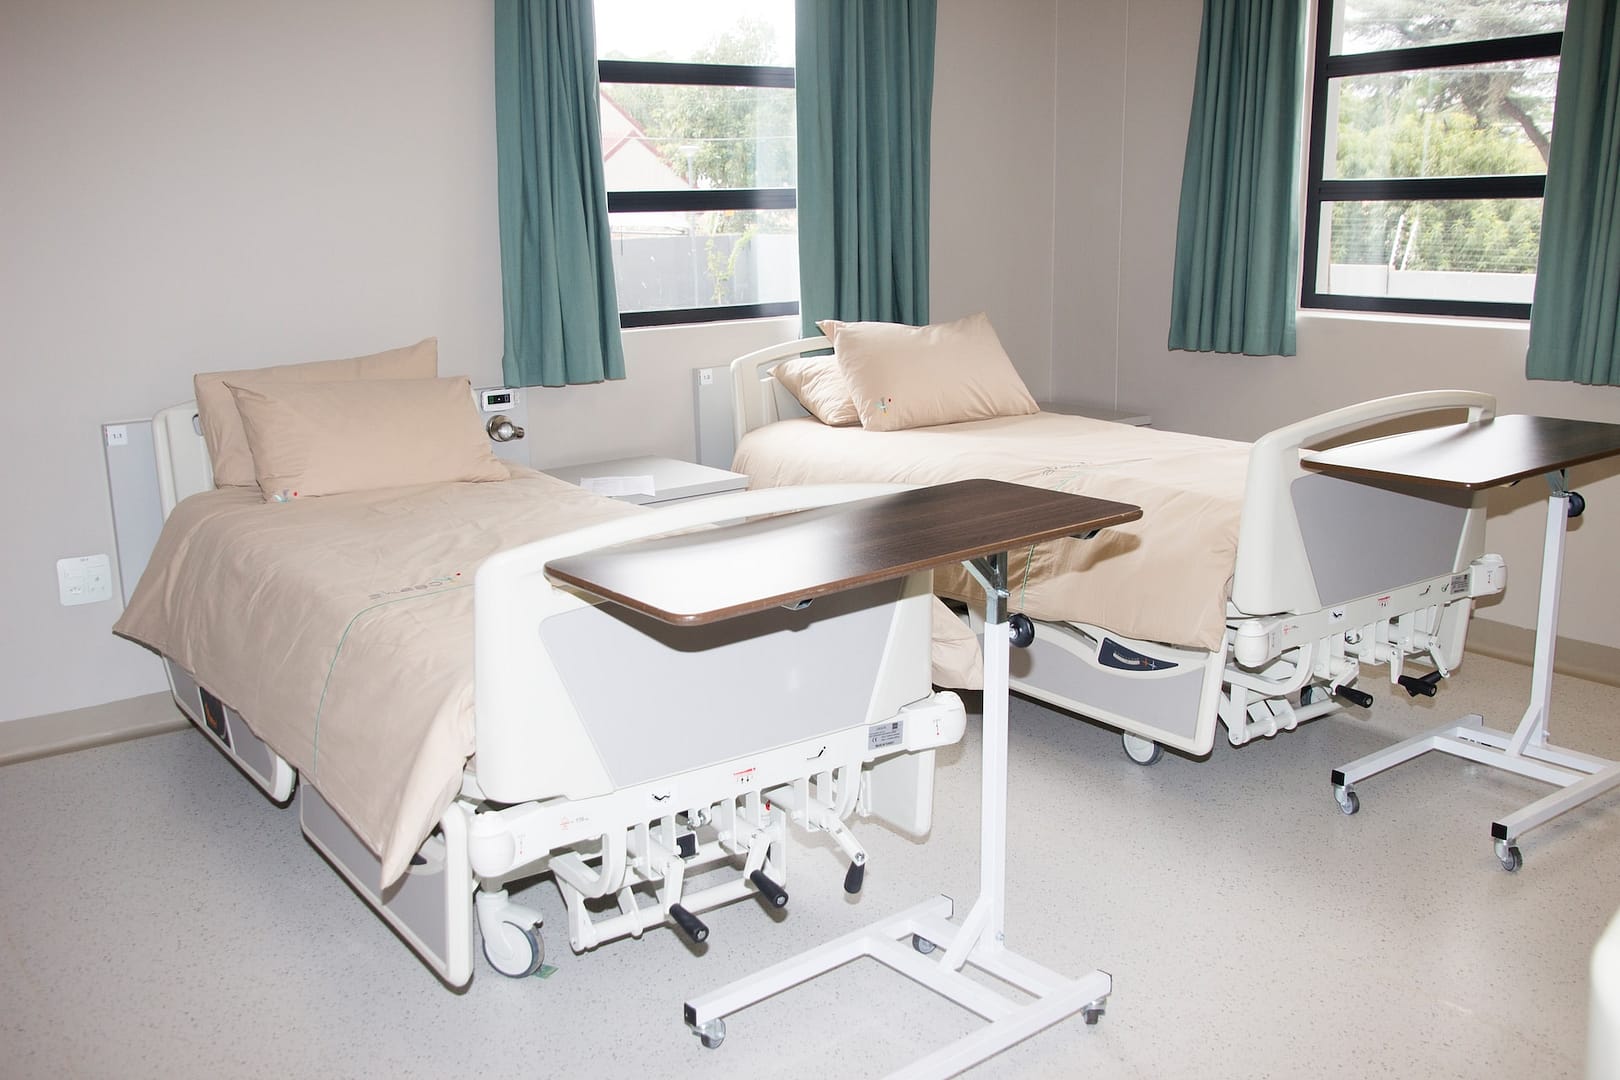 vacant hospital beds